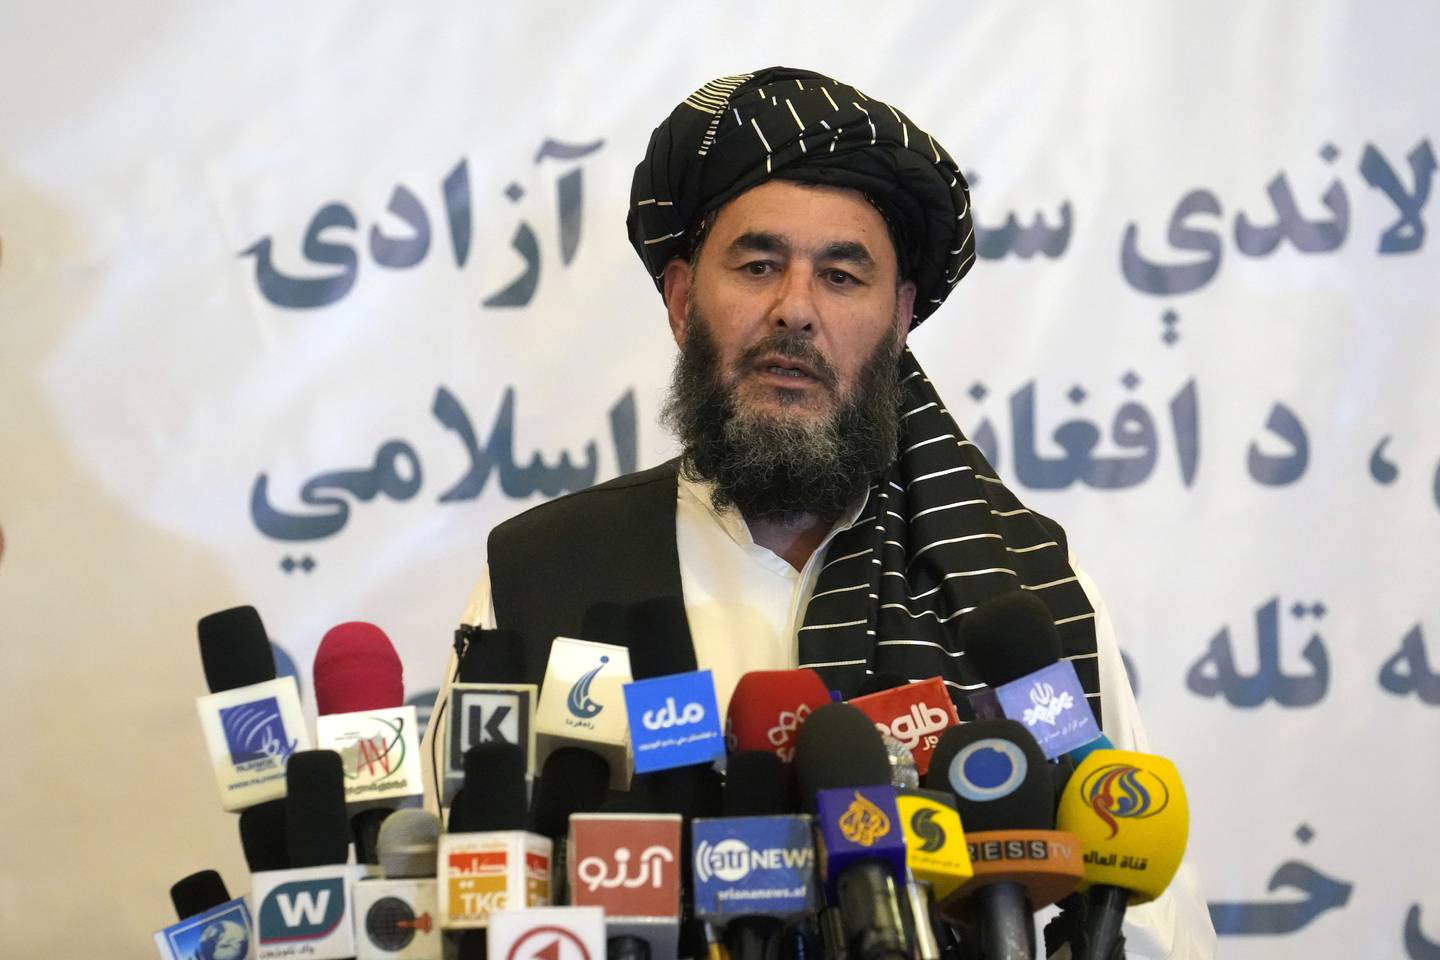 Bashir Noorzai speaks during his release ceremony at the Intercontinental Hotel, in Kabul, Afghanistan, Monday, Sept. 19, 2022.